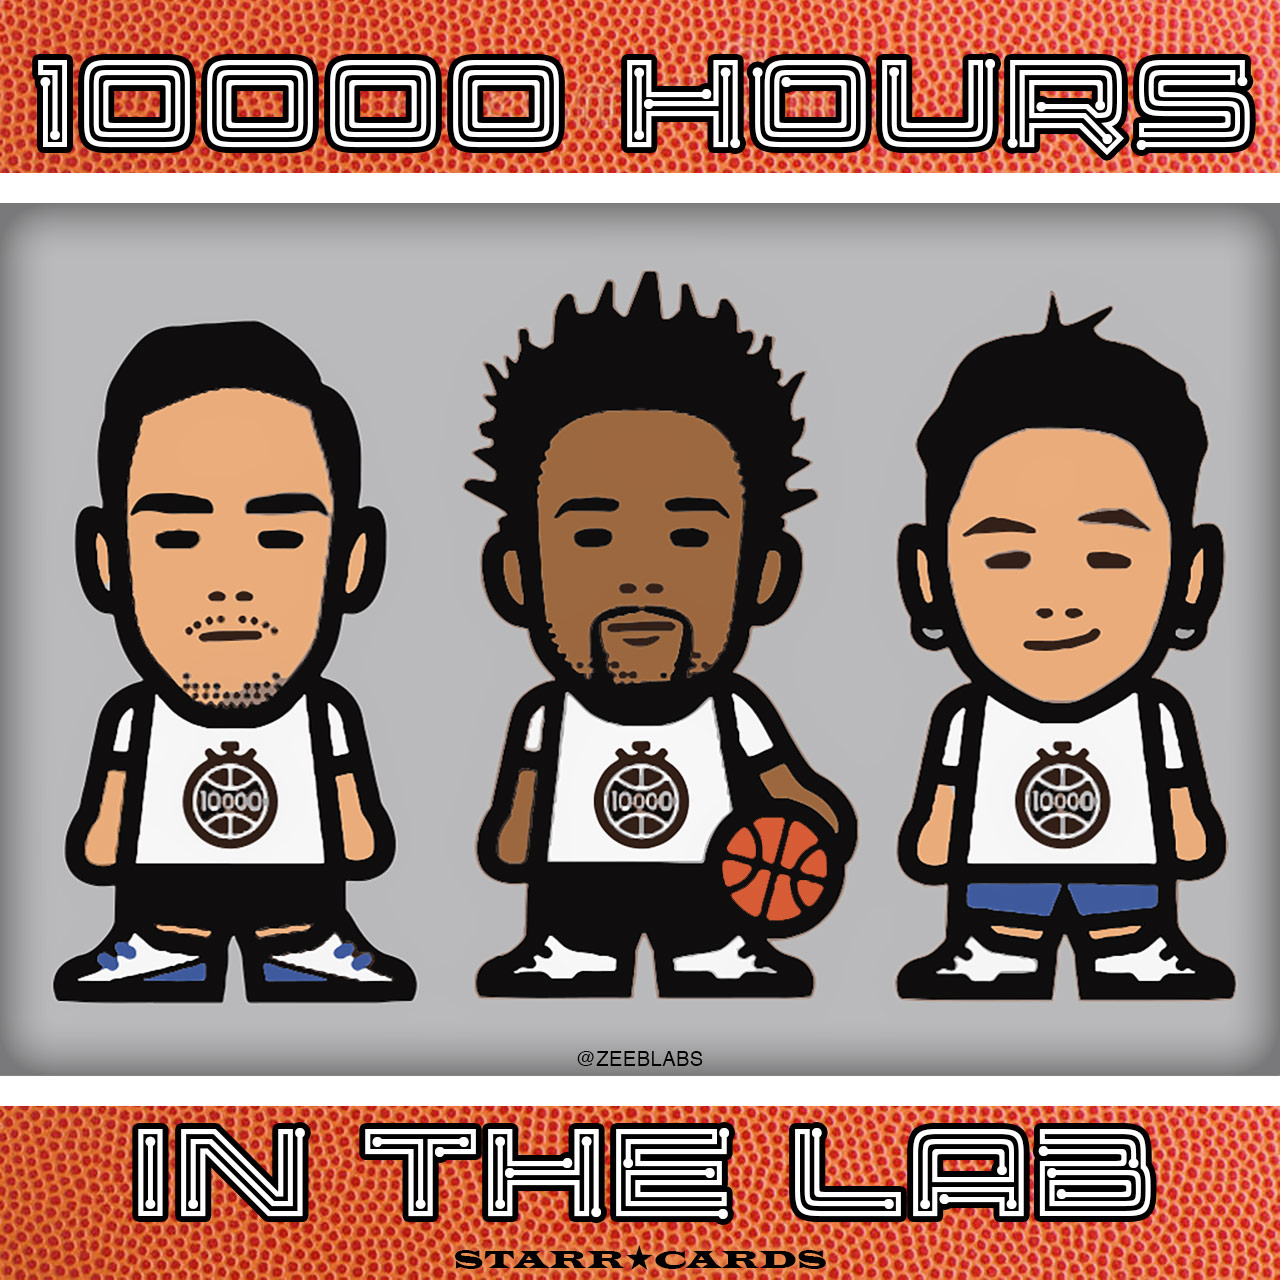 Devin Williams: The Man Behind '10000 HOURS